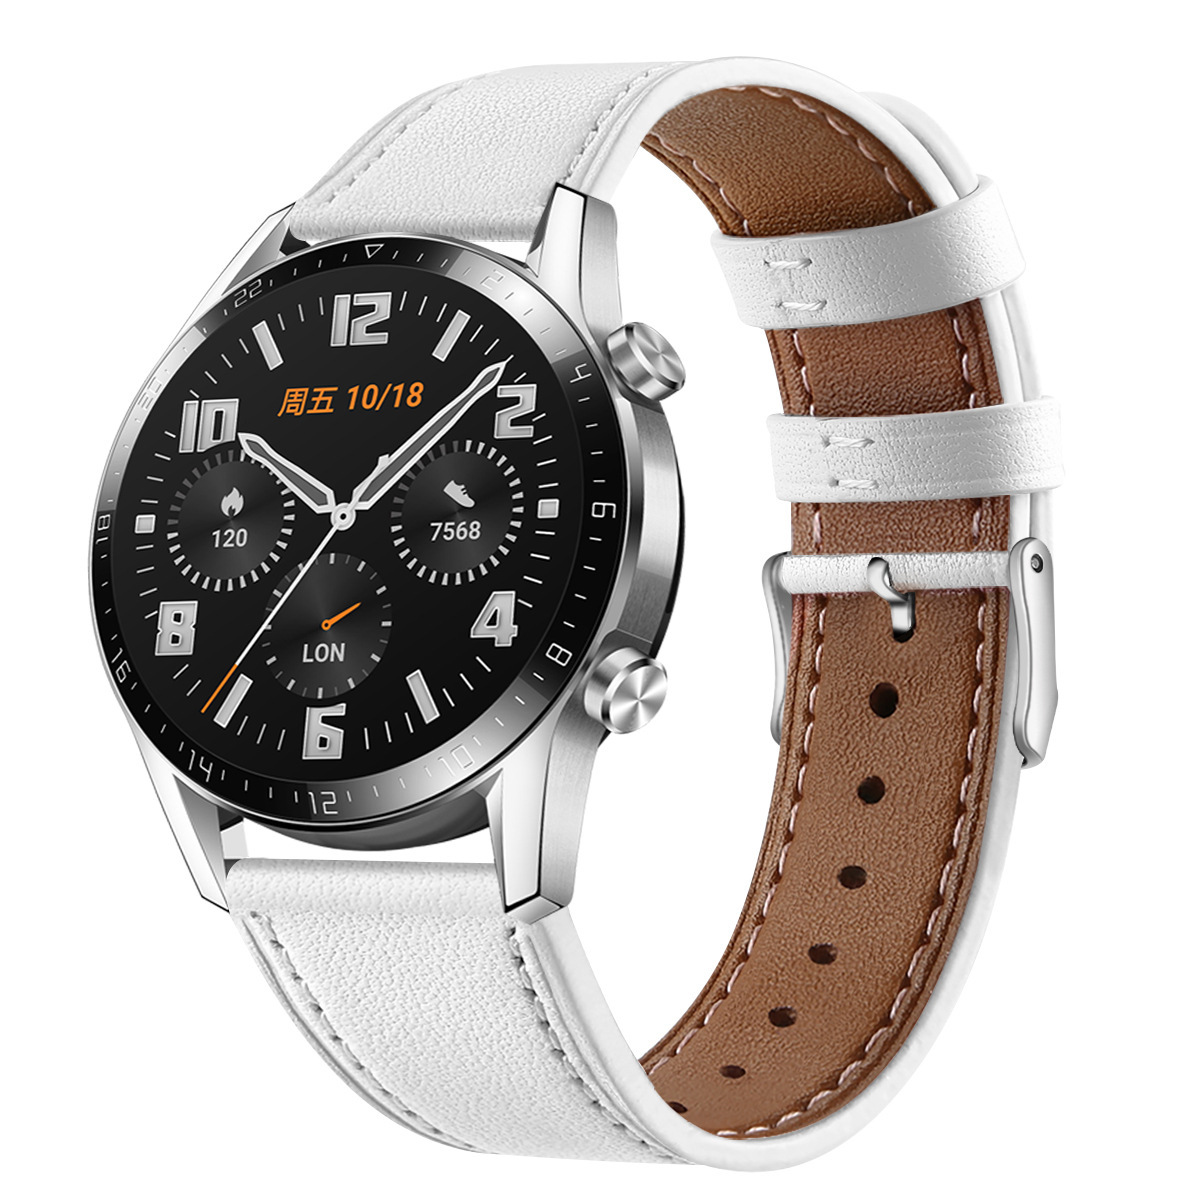 Bakeey-22mm-Replacement-Strap-Genuine-Leather-Smart-Watch-Band-For-Huawei-WATCH-GTGT2-46MM-1656574-2